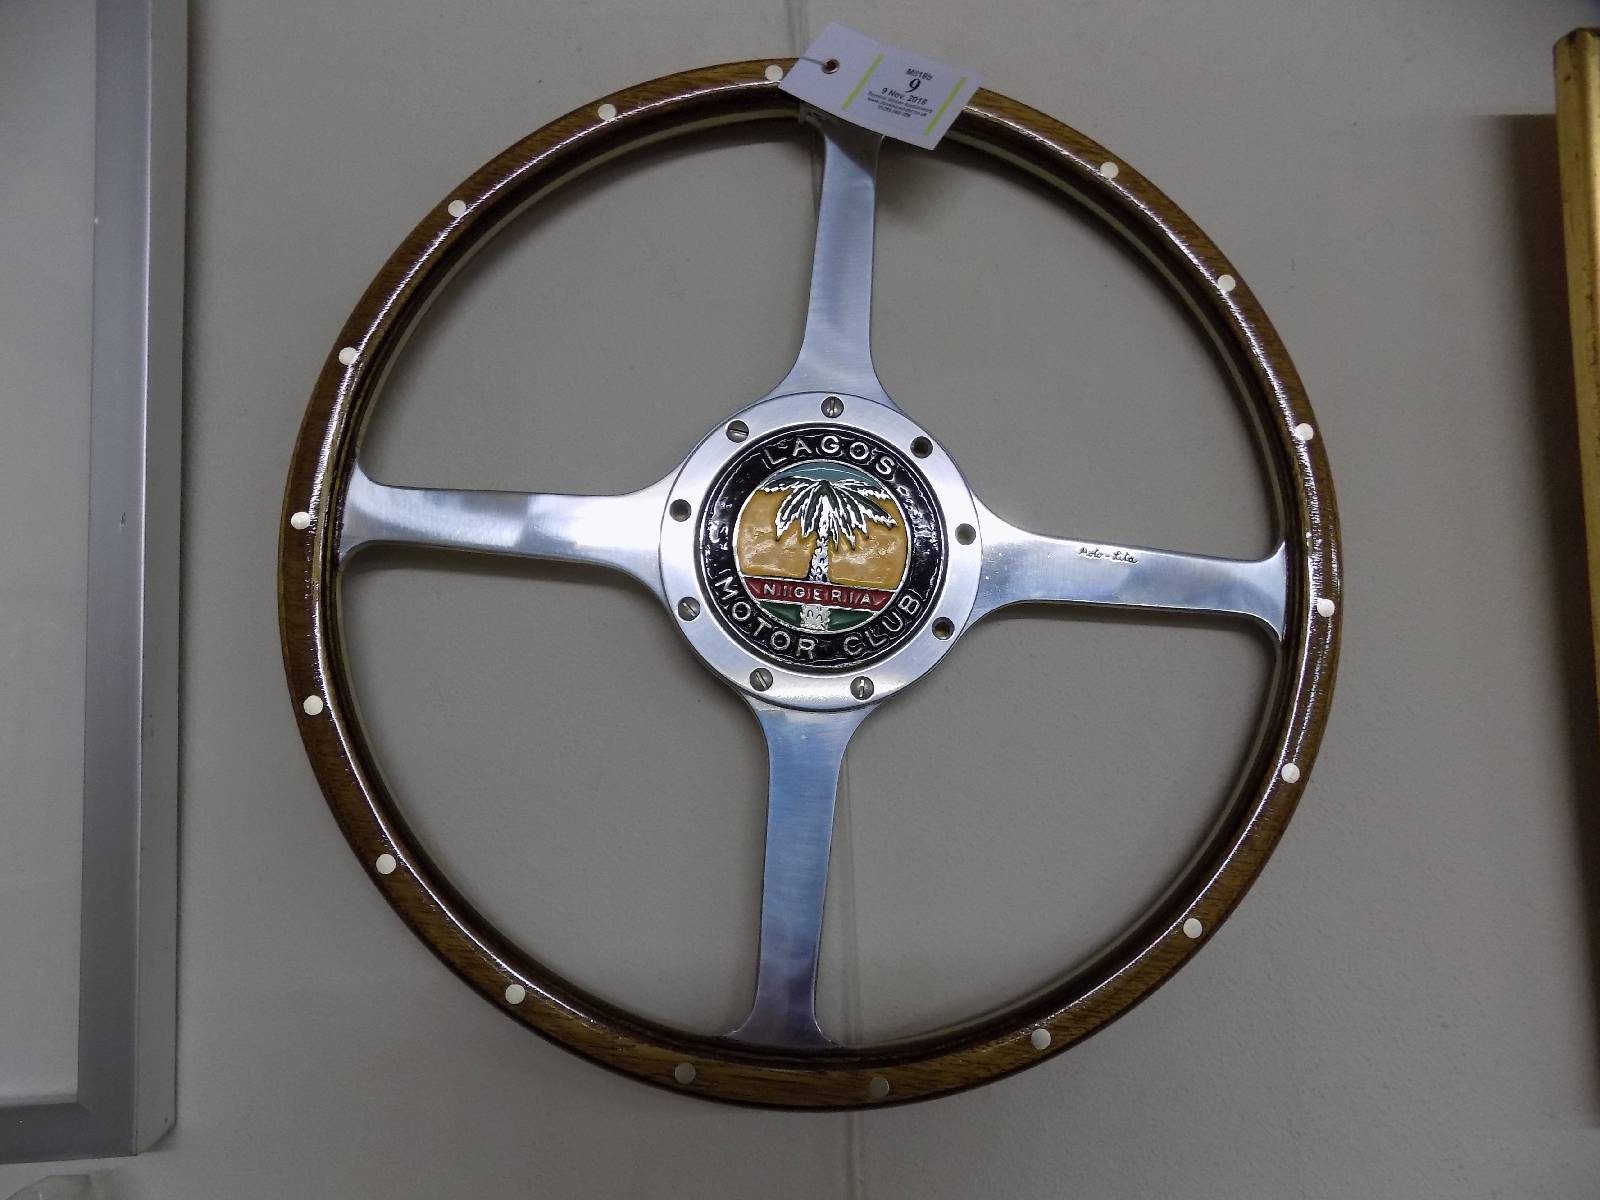 *Moto-Lita Steering Wheel. A 15-inch wooden rimmed steering wheel, with a Lagos Motor Club painted